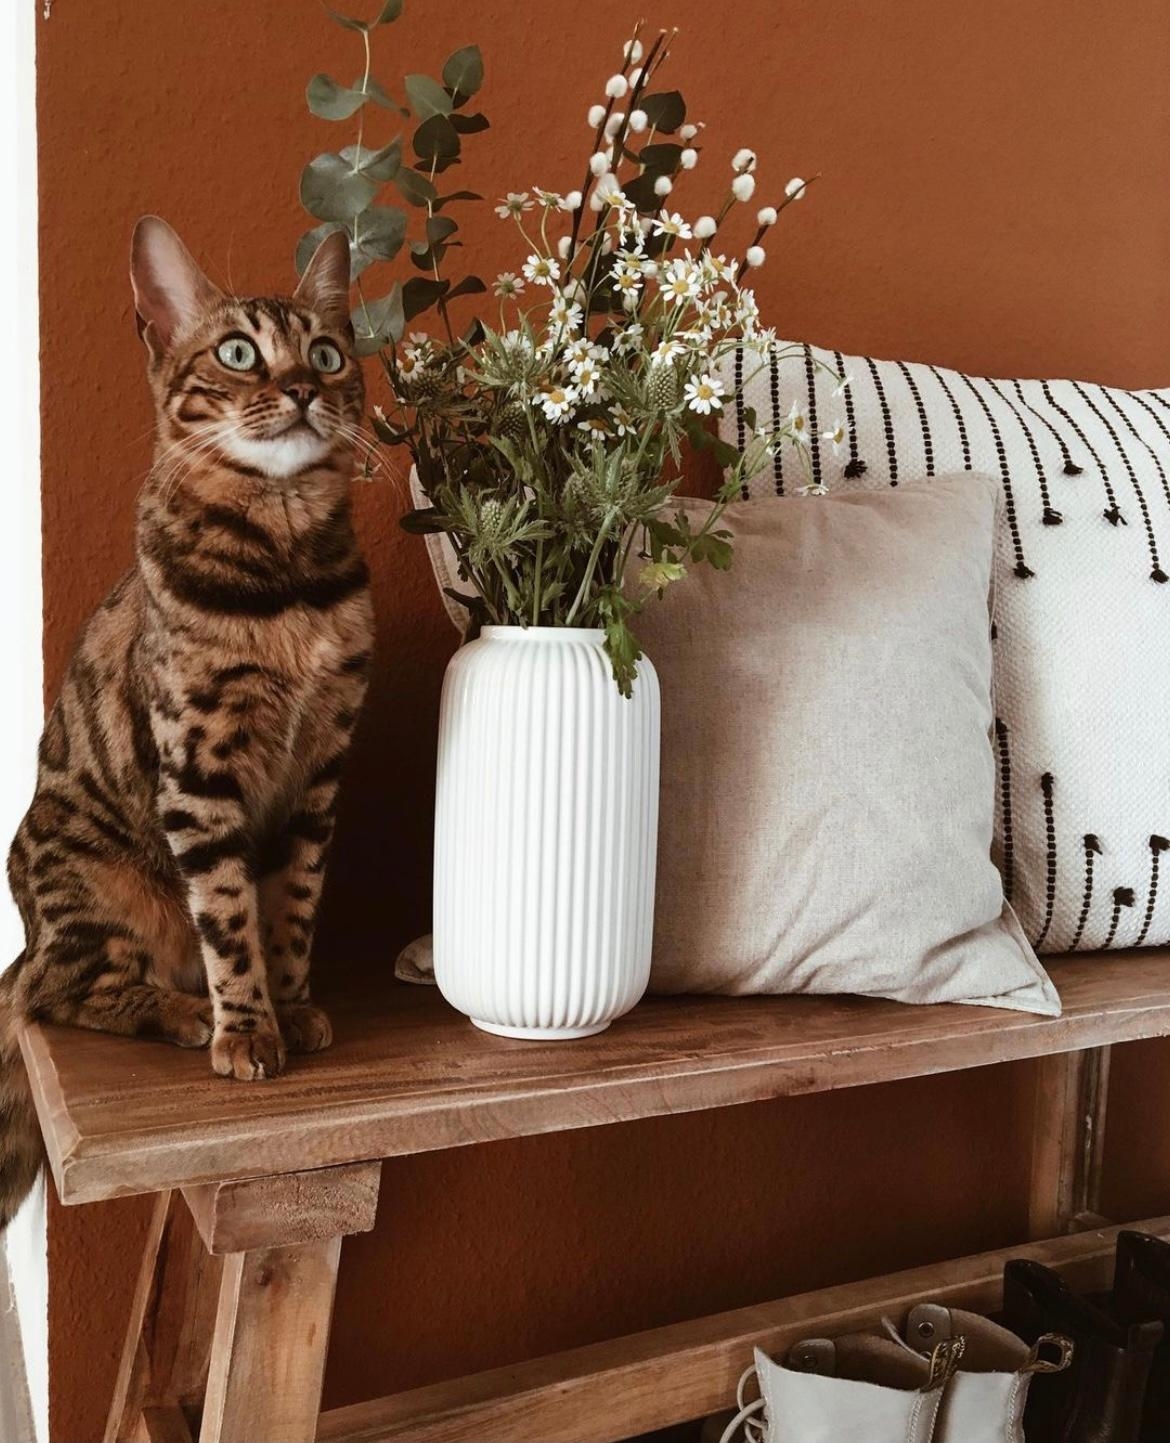 Home is where the cat is 🧡
#home #catmom #freshflowers #sitzbank #cozy 